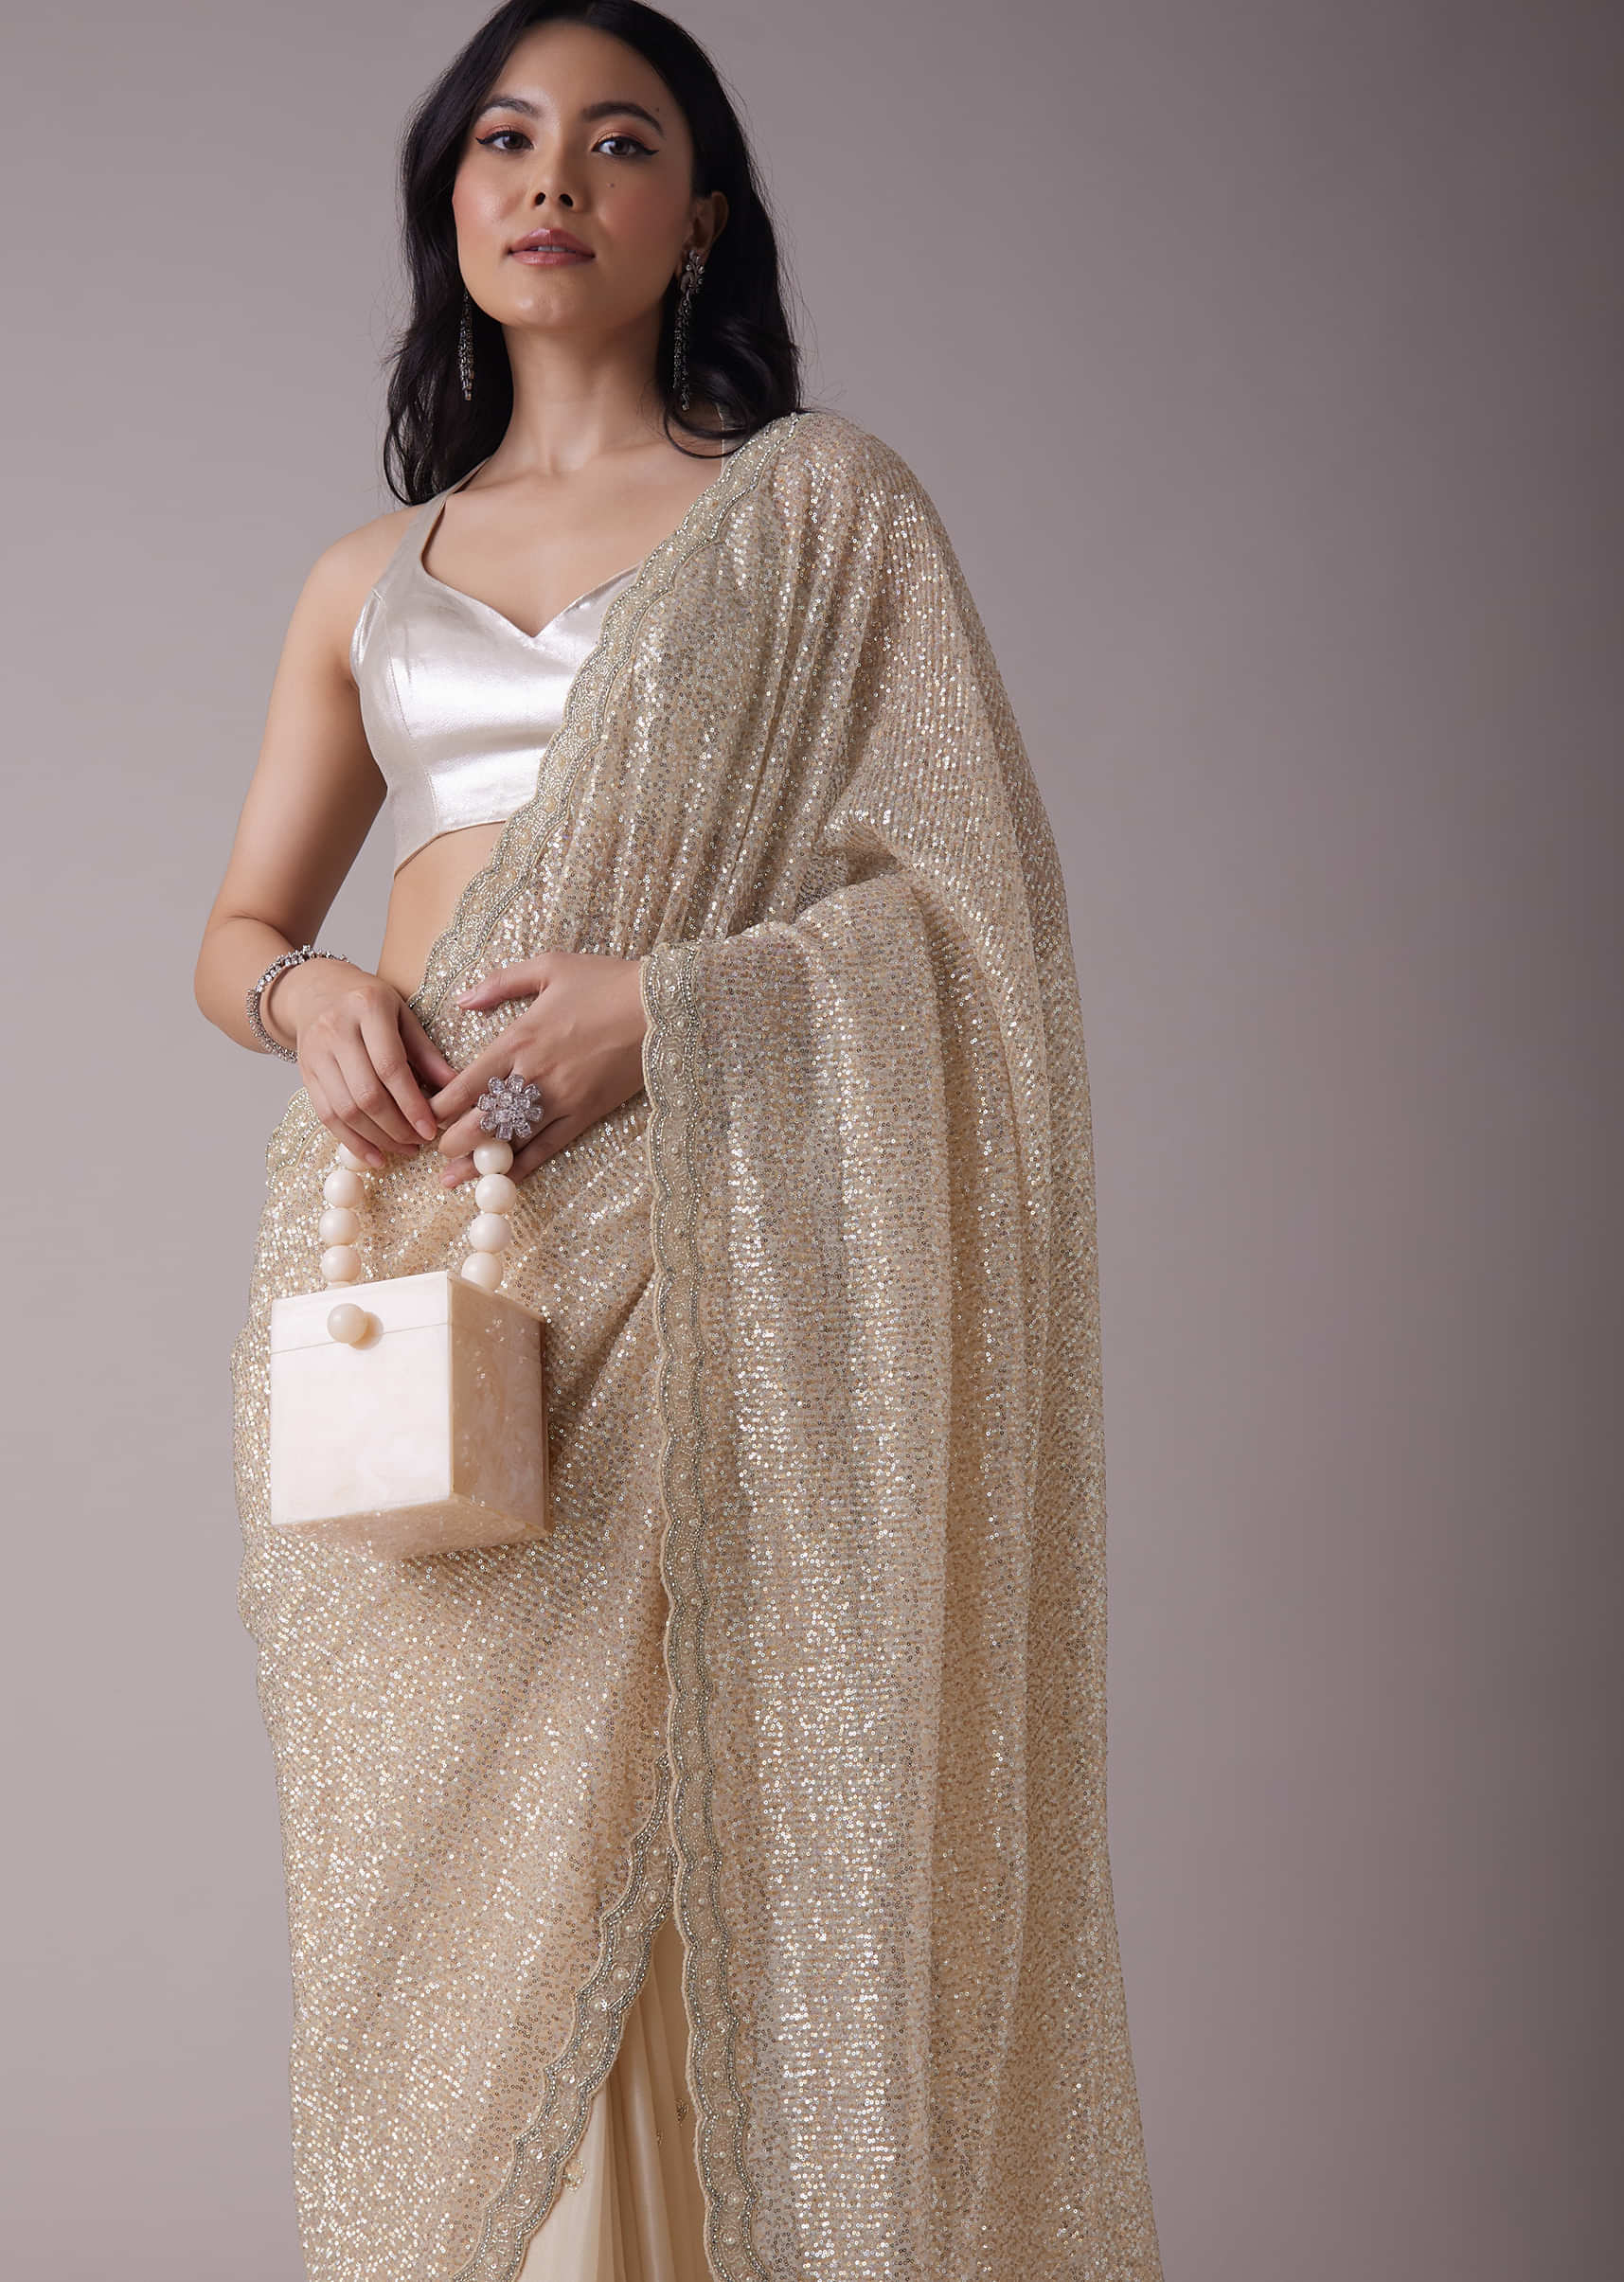 Gold Sequins Saree With An Embellished Border